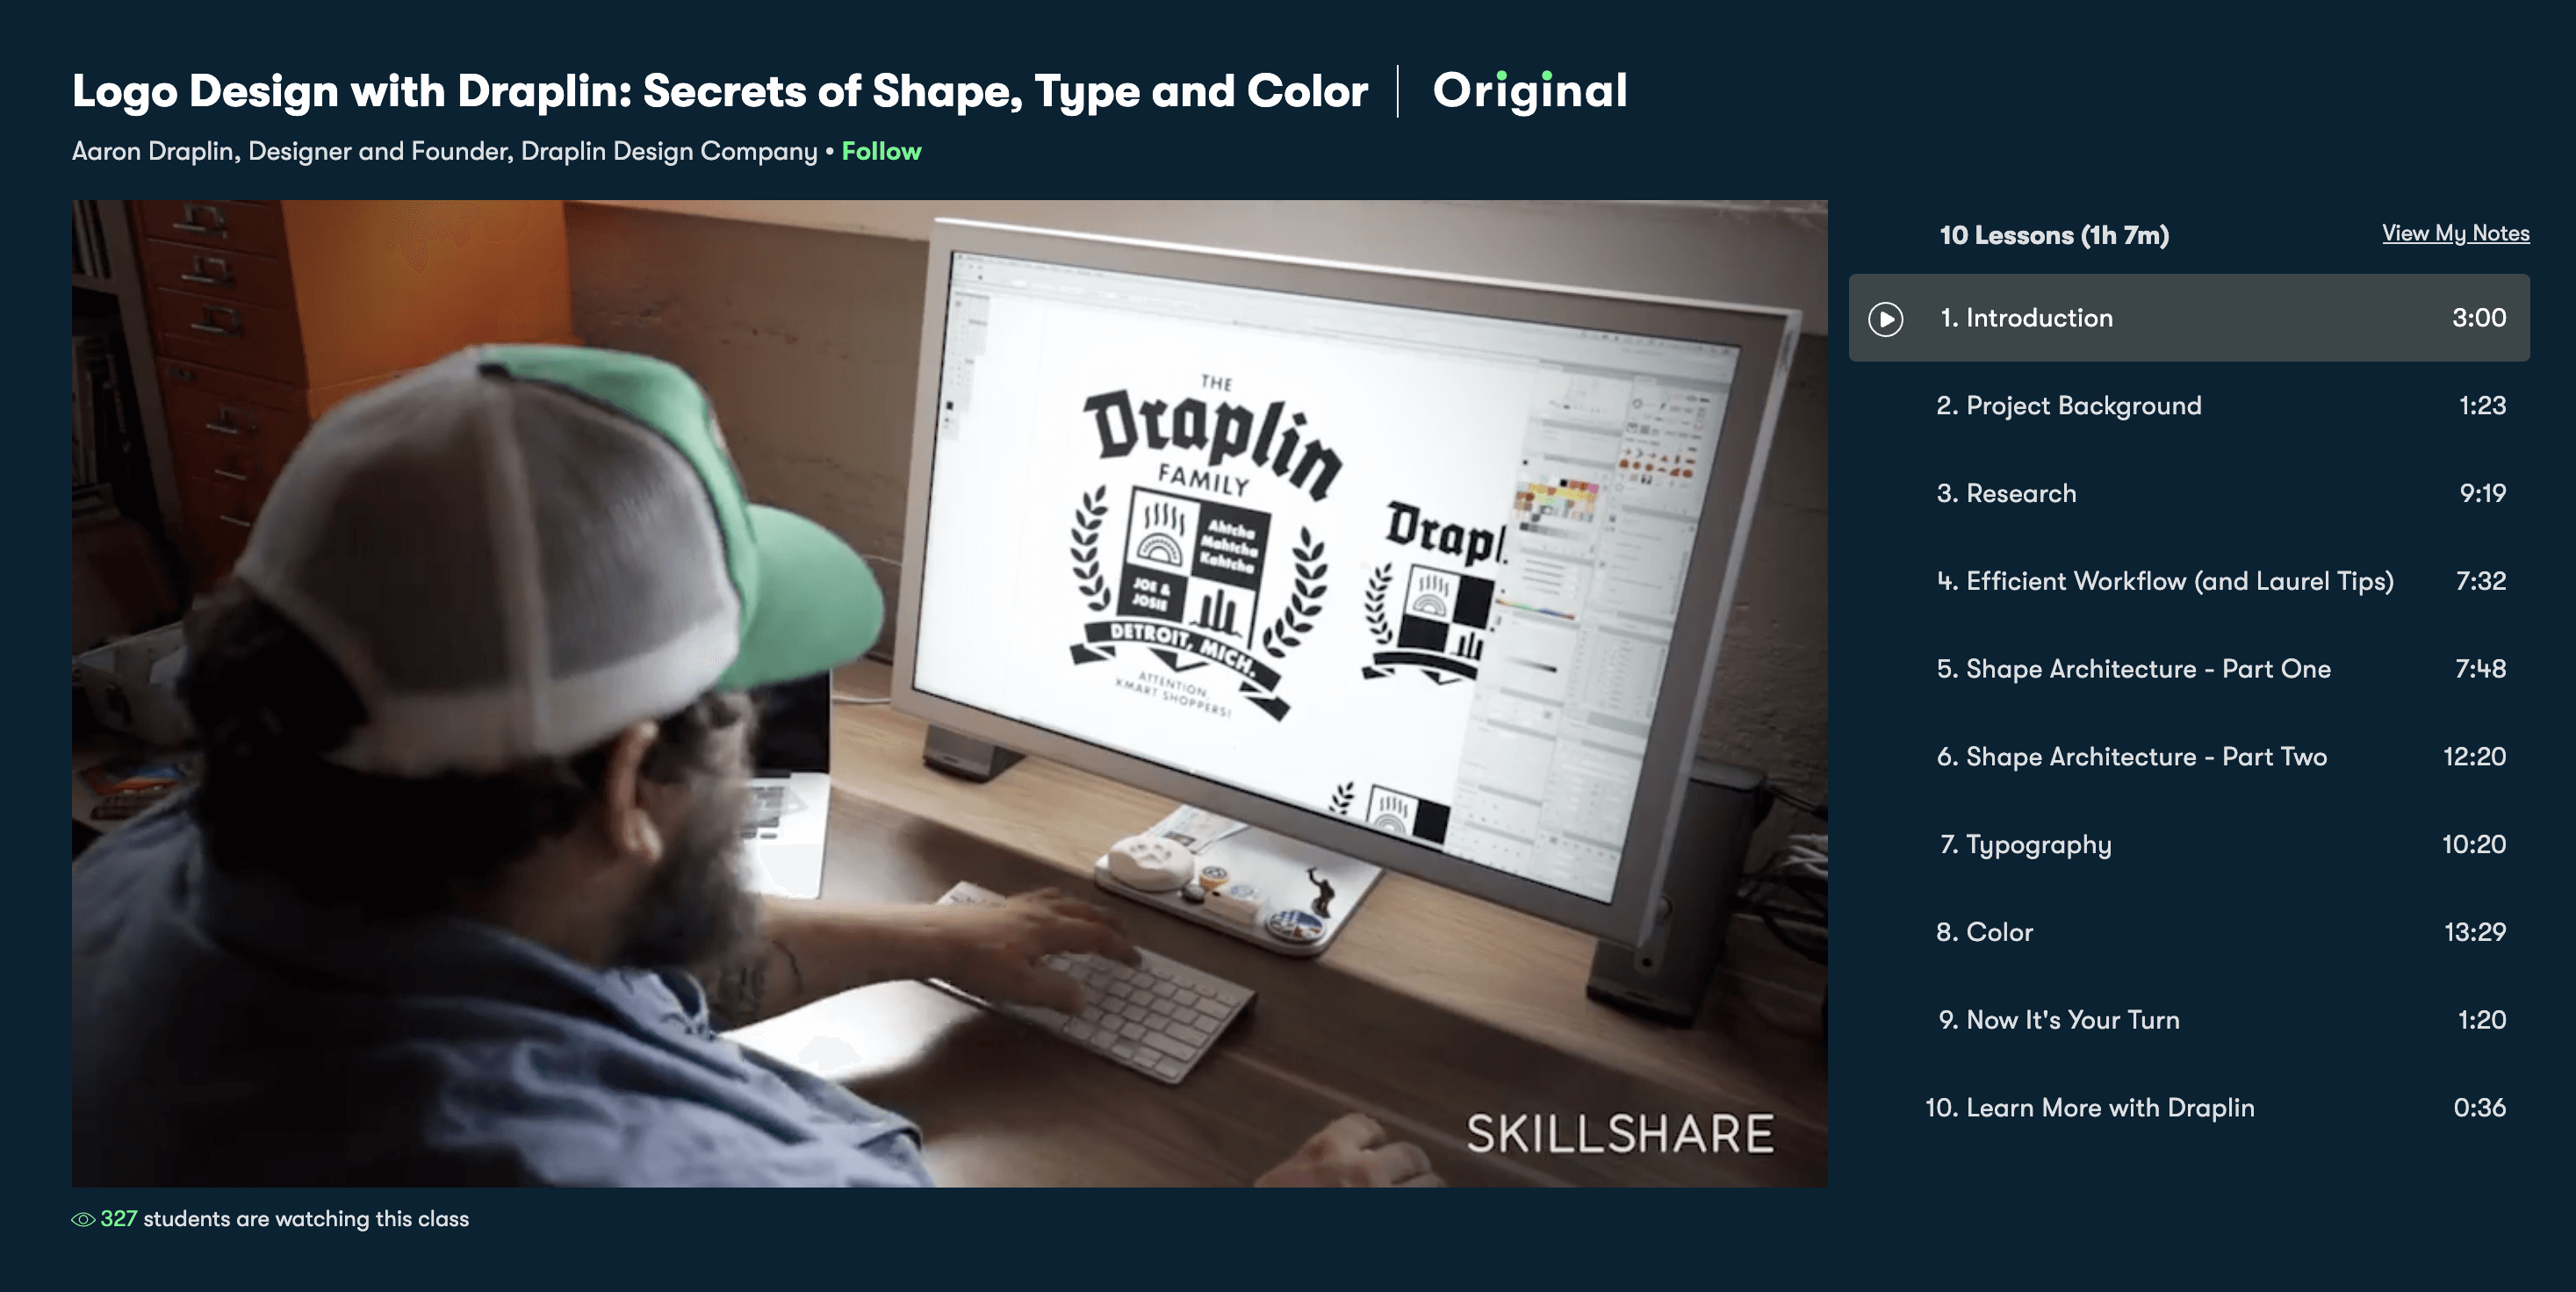 A still from the Skillshare course 'Logo Design with Draplin: Secrets of Shape, Type, and Color'